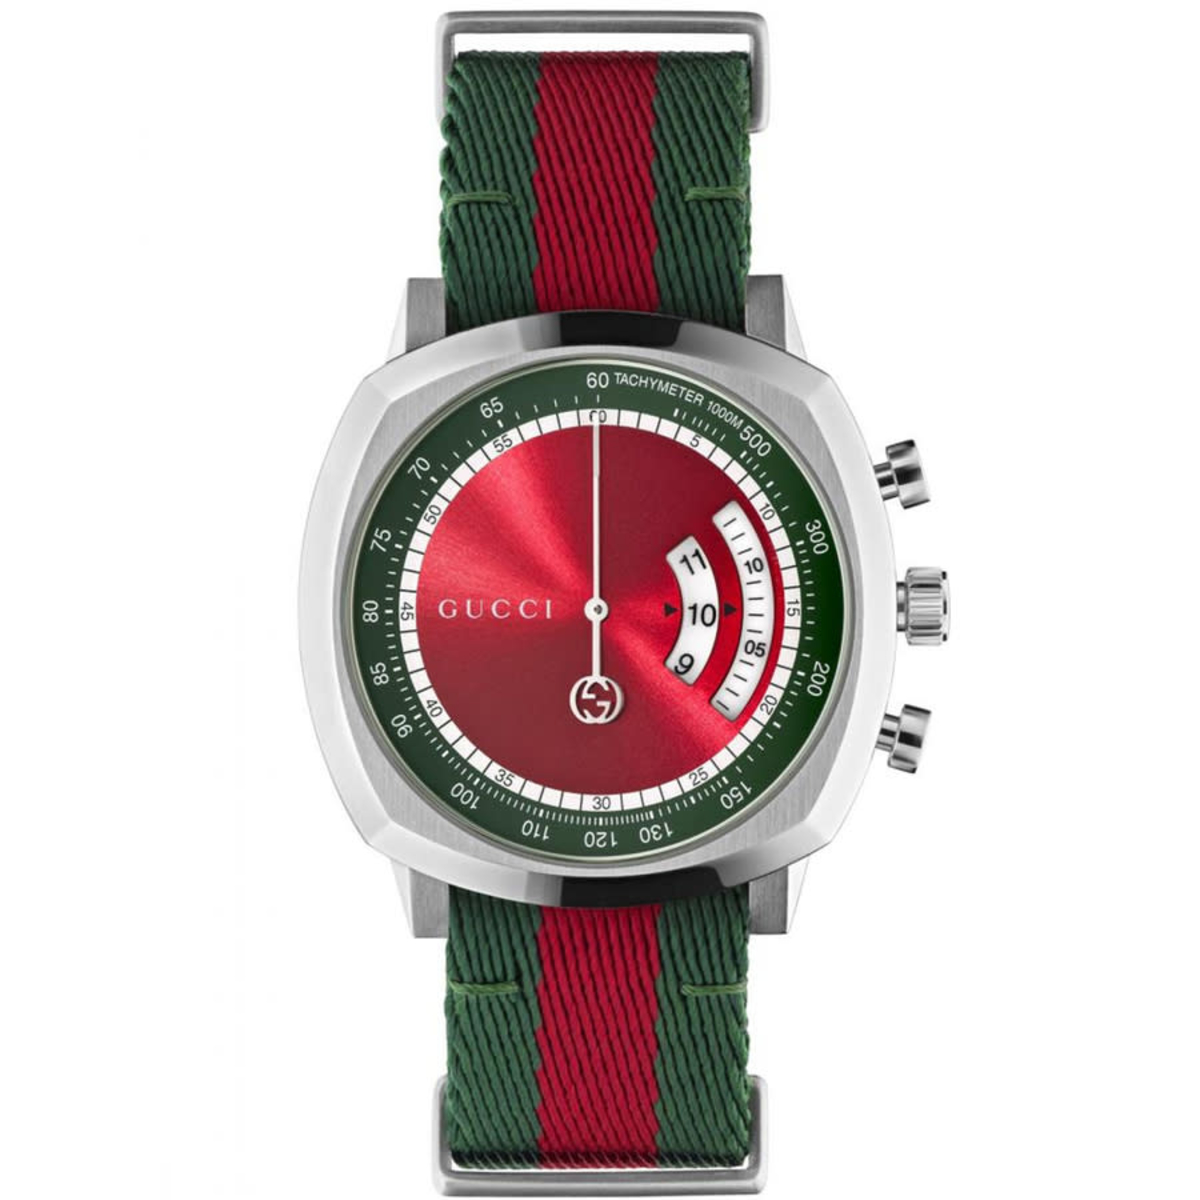 Gucci Men's Authenticated Watch